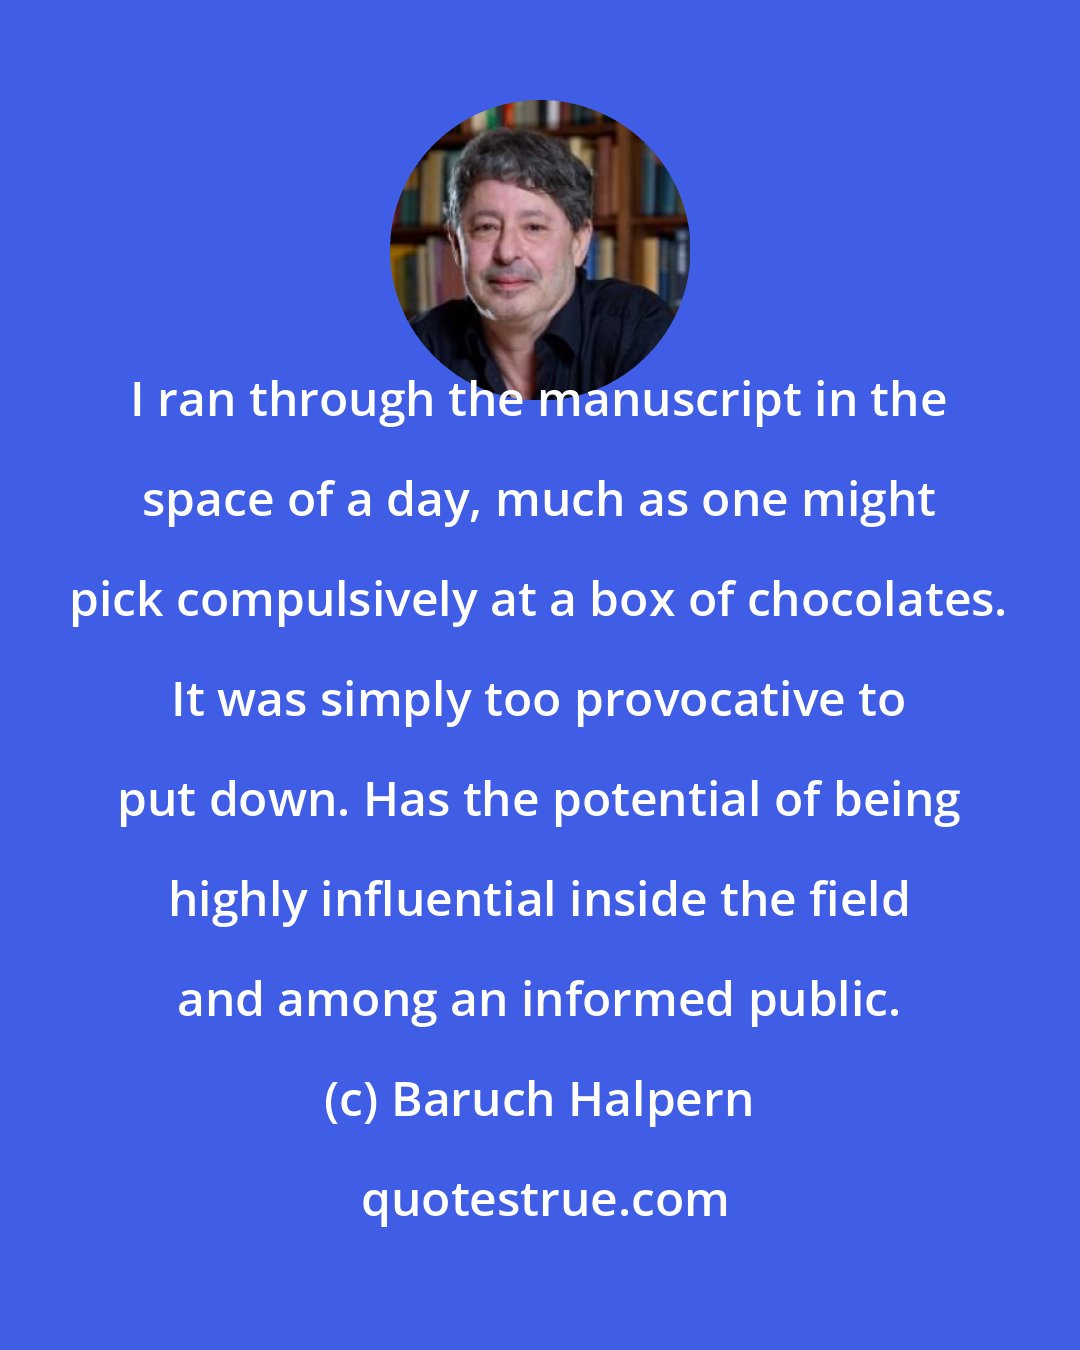 Baruch Halpern: I ran through the manuscript in the space of a day, much as one might pick compulsively at a box of chocolates. It was simply too provocative to put down. Has the potential of being highly influential inside the field and among an informed public.